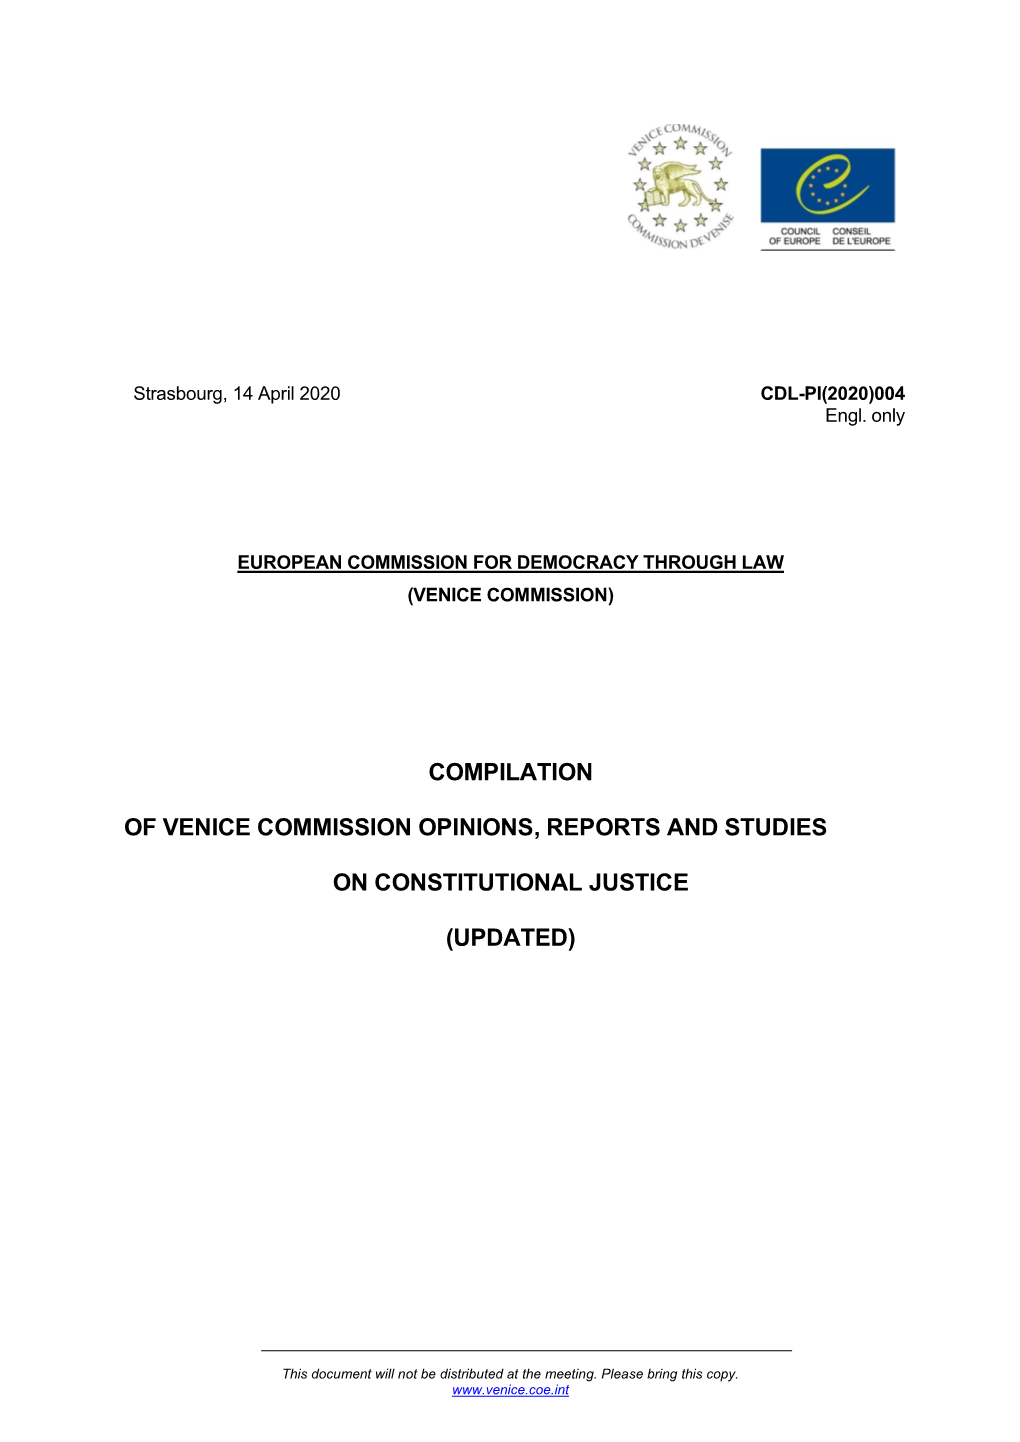 Compilation of Venice Commission Opinions, Reports and Studies on Constitutional Justice